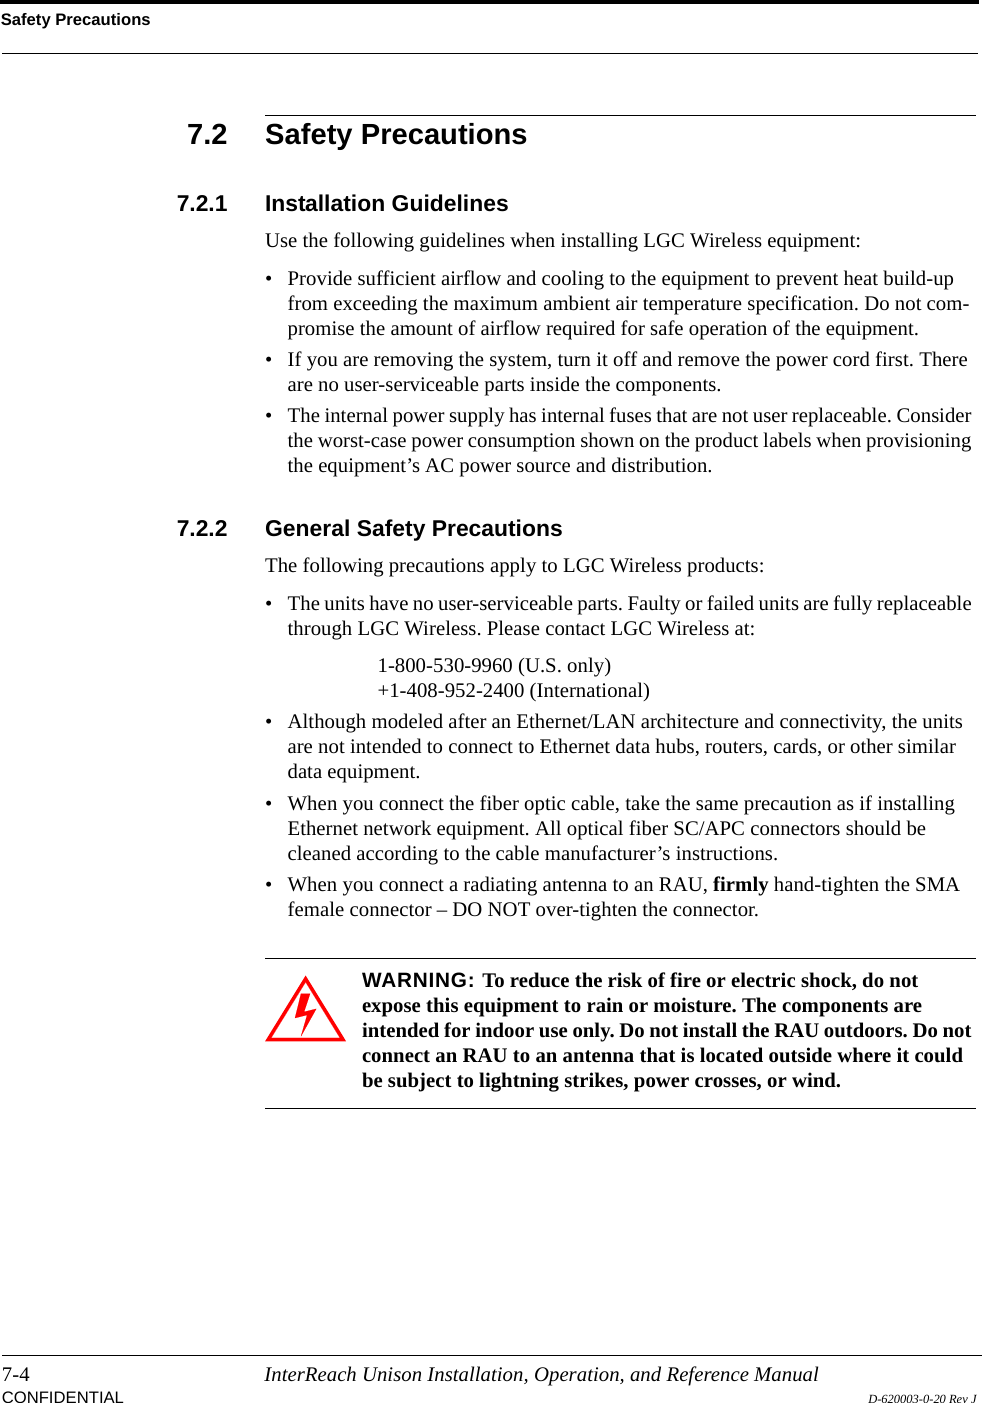 Safety Precautions7-4 InterReach Unison Installation, Operation, and Reference ManualCONFIDENTIAL D-620003-0-20 Rev J7.2 Safety Precautions7.2.1 Installation GuidelinesUse the following guidelines when installing LGC Wireless equipment:• Provide sufficient airflow and cooling to the equipment to prevent heat build-up from exceeding the maximum ambient air temperature specification. Do not com-promise the amount of airflow required for safe operation of the equipment.• If you are removing the system, turn it off and remove the power cord first. There are no user-serviceable parts inside the components.• The internal power supply has internal fuses that are not user replaceable. Consider the worst-case power consumption shown on the product labels when provisioning the equipment’s AC power source and distribution.7.2.2 General Safety PrecautionsThe following precautions apply to LGC Wireless products:• The units have no user-serviceable parts. Faulty or failed units are fully replaceable through LGC Wireless. Please contact LGC Wireless at:1-800-530-9960 (U.S. only)+1-408-952-2400 (International)• Although modeled after an Ethernet/LAN architecture and connectivity, the units are not intended to connect to Ethernet data hubs, routers, cards, or other similar data equipment.• When you connect the fiber optic cable, take the same precaution as if installing Ethernet network equipment. All optical fiber SC/APC connectors should be cleaned according to the cable manufacturer’s instructions.• When you connect a radiating antenna to an RAU, firmly hand-tighten the SMA female connector – DO NOT over-tighten the connector.WARNING: To reduce the risk of fire or electric shock, do not expose this equipment to rain or moisture. The components are intended for indoor use only. Do not install the RAU outdoors. Do not connect an RAU to an antenna that is located outside where it could be subject to lightning strikes, power crosses, or wind.